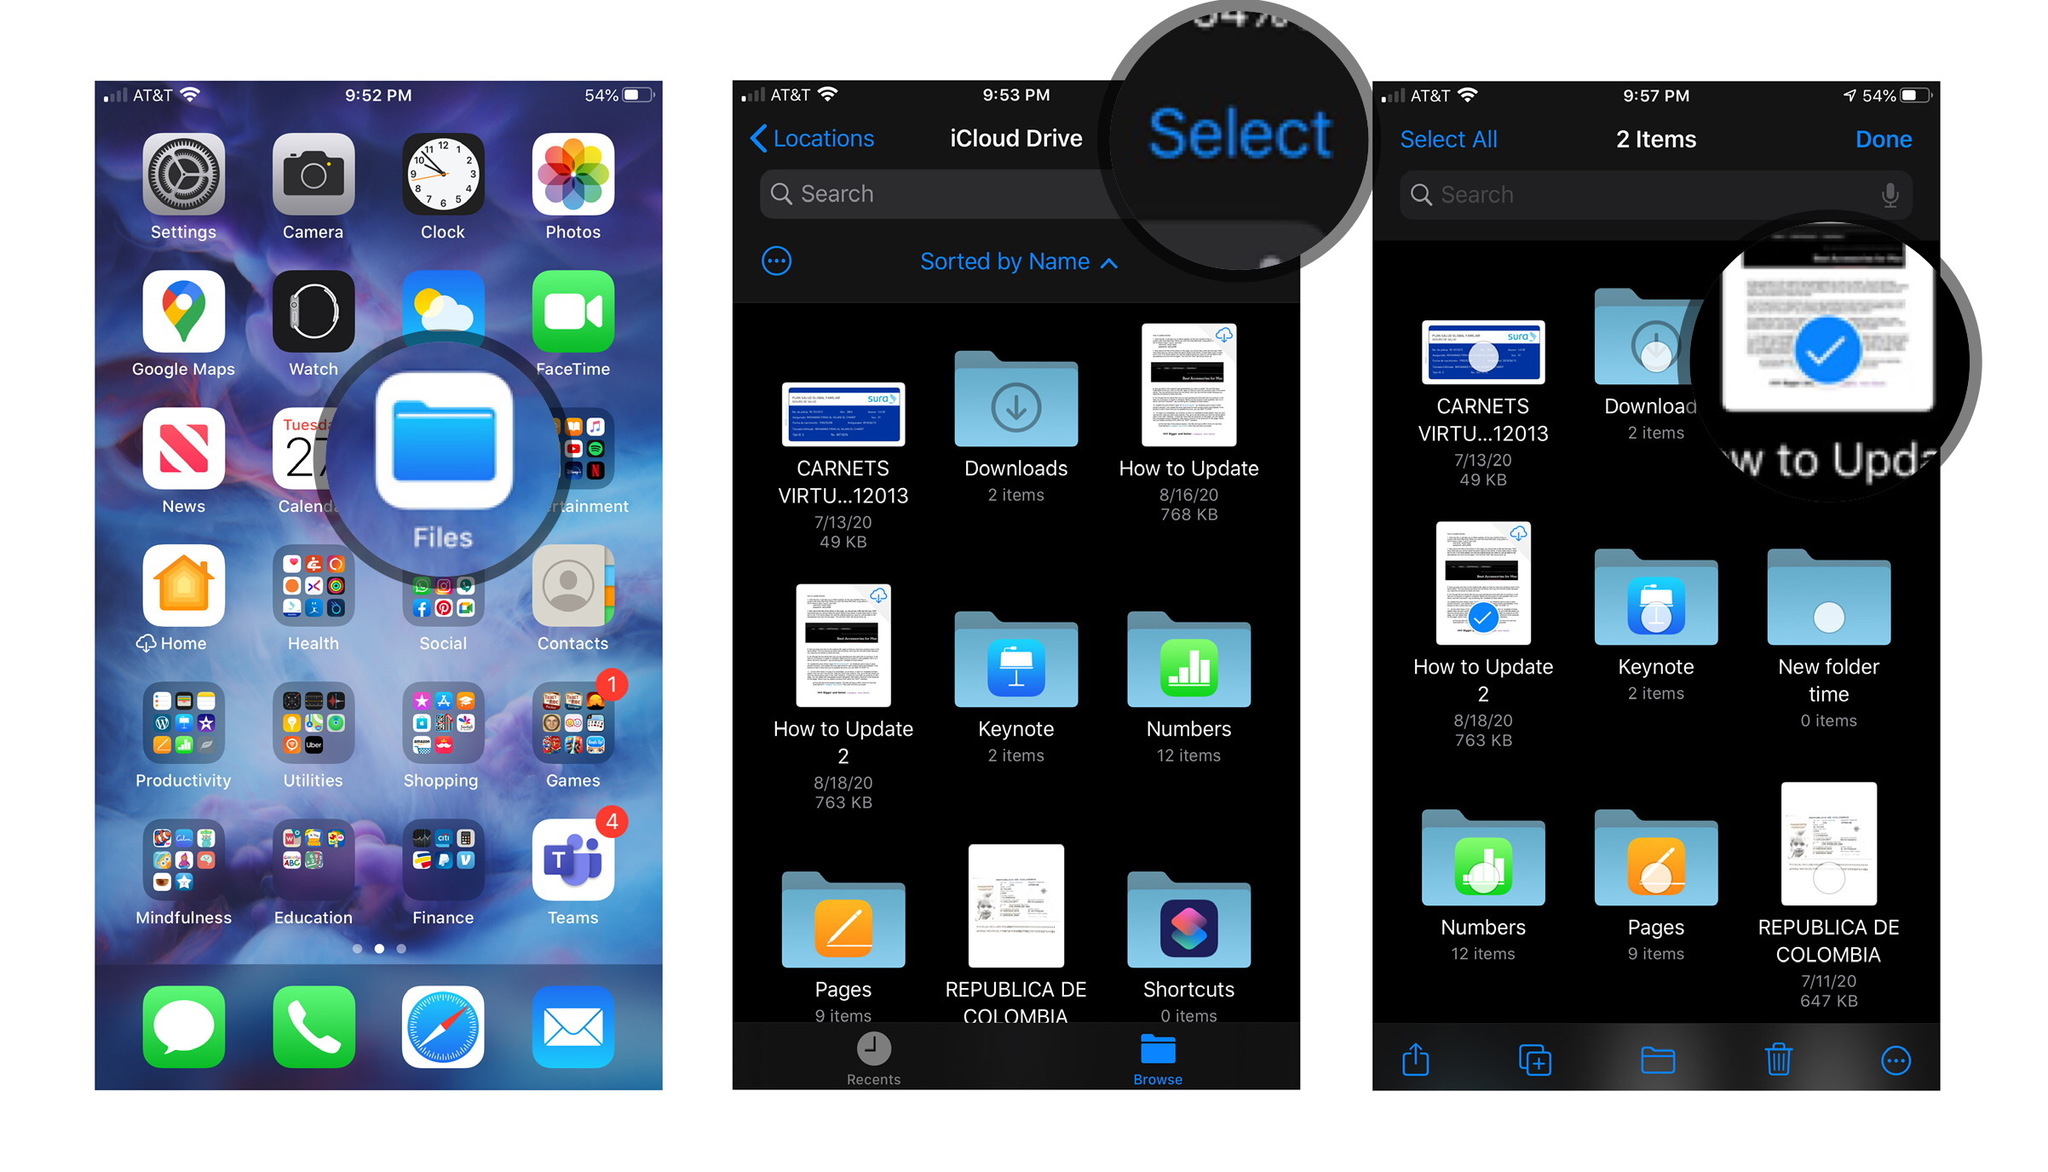 How to move files in iOS: Open Files, Tap Select, Select Files